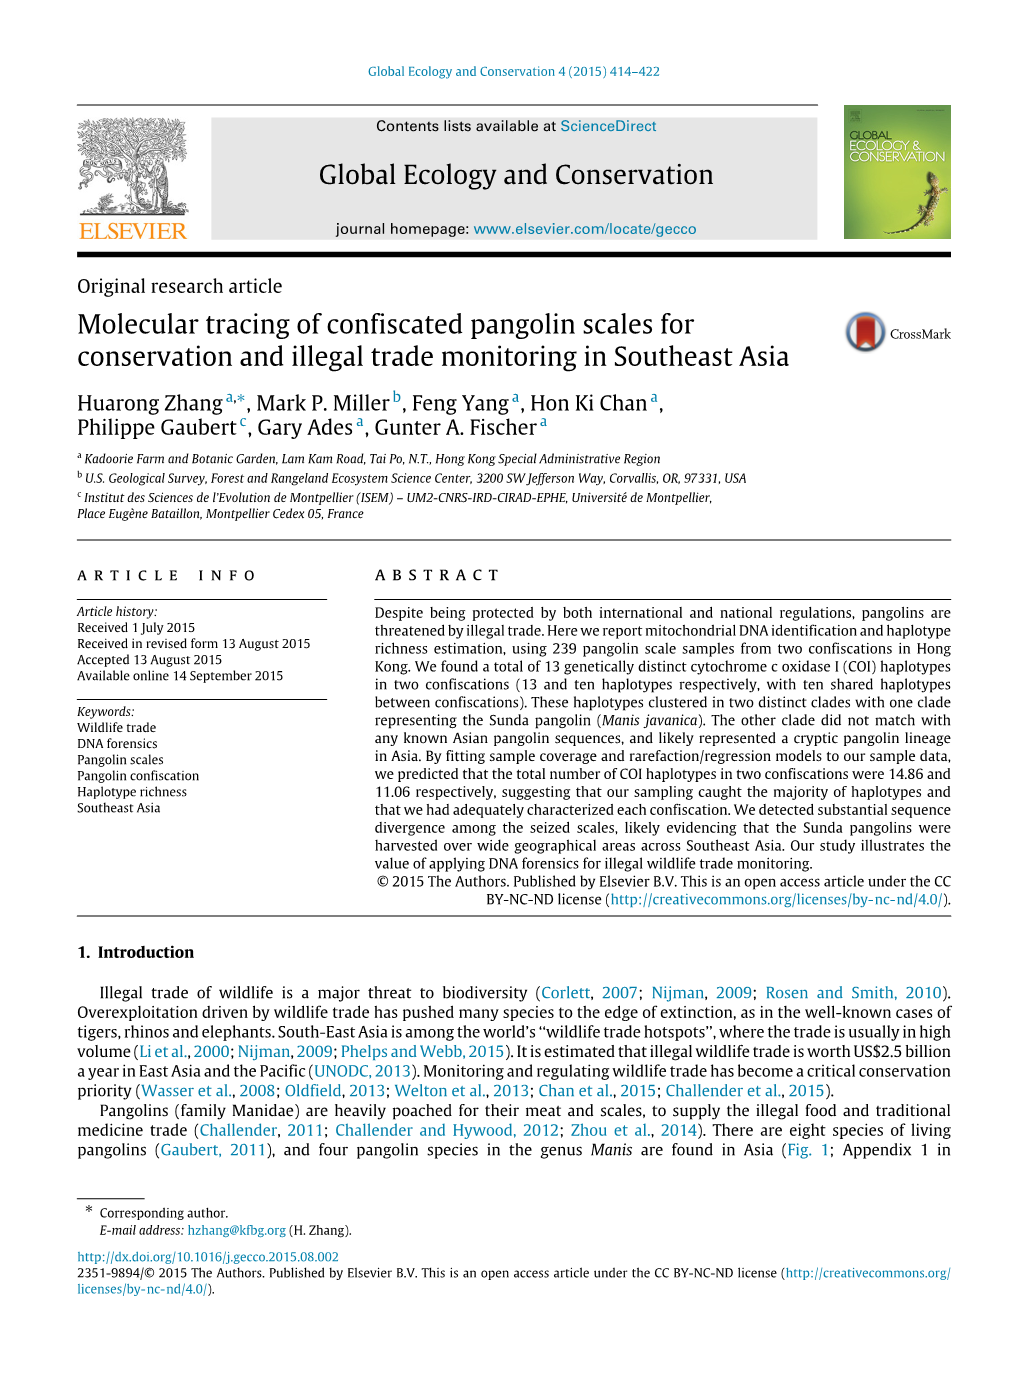 Molecular Tracing of Confiscated Pangolin Scales for Conservation and Illegal Trade Monitoring in Southeast Asia